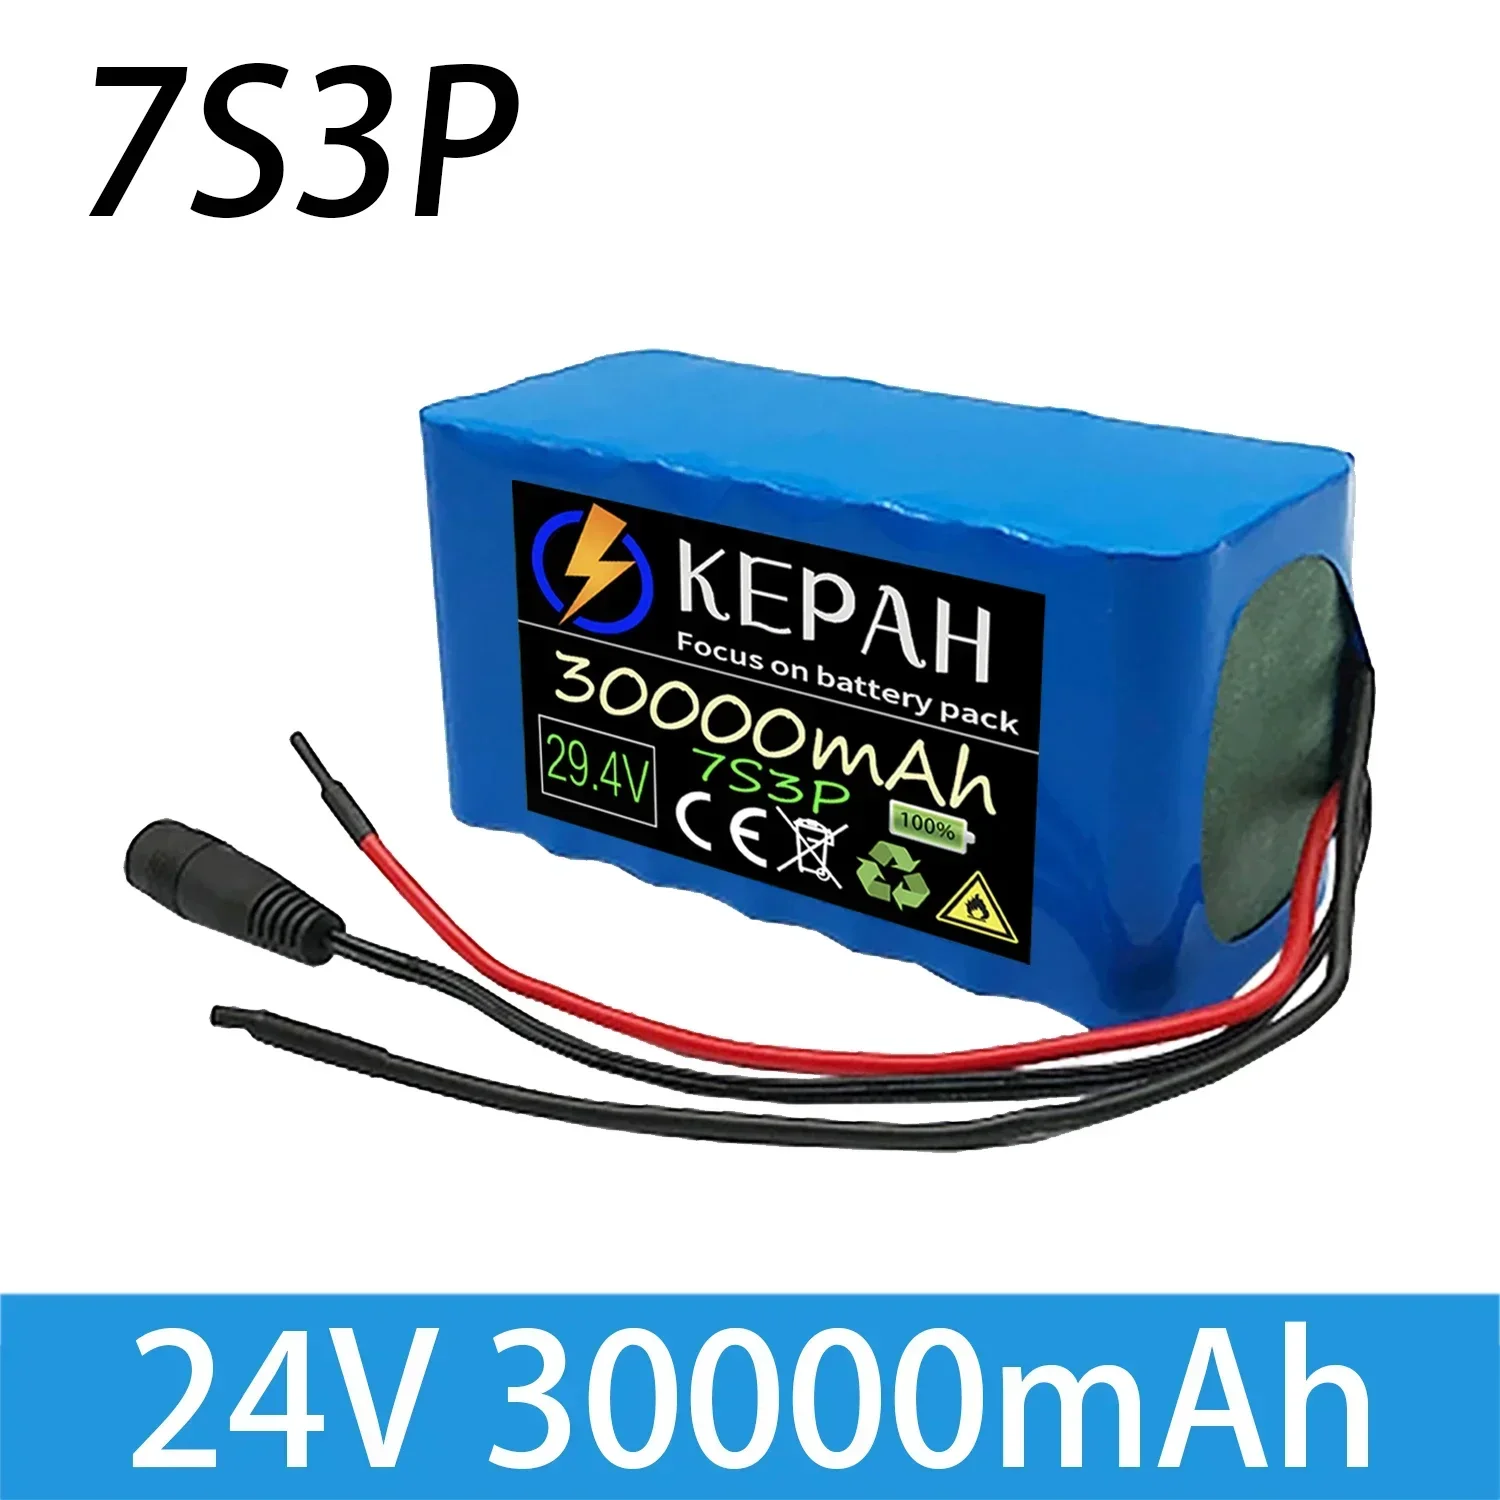 

24V 30000mAh 7S3P 18650 Lithium Battery 24V Lithium Battery Wheelchair 7s3p Battery Pack 24v for Electric Bicycle